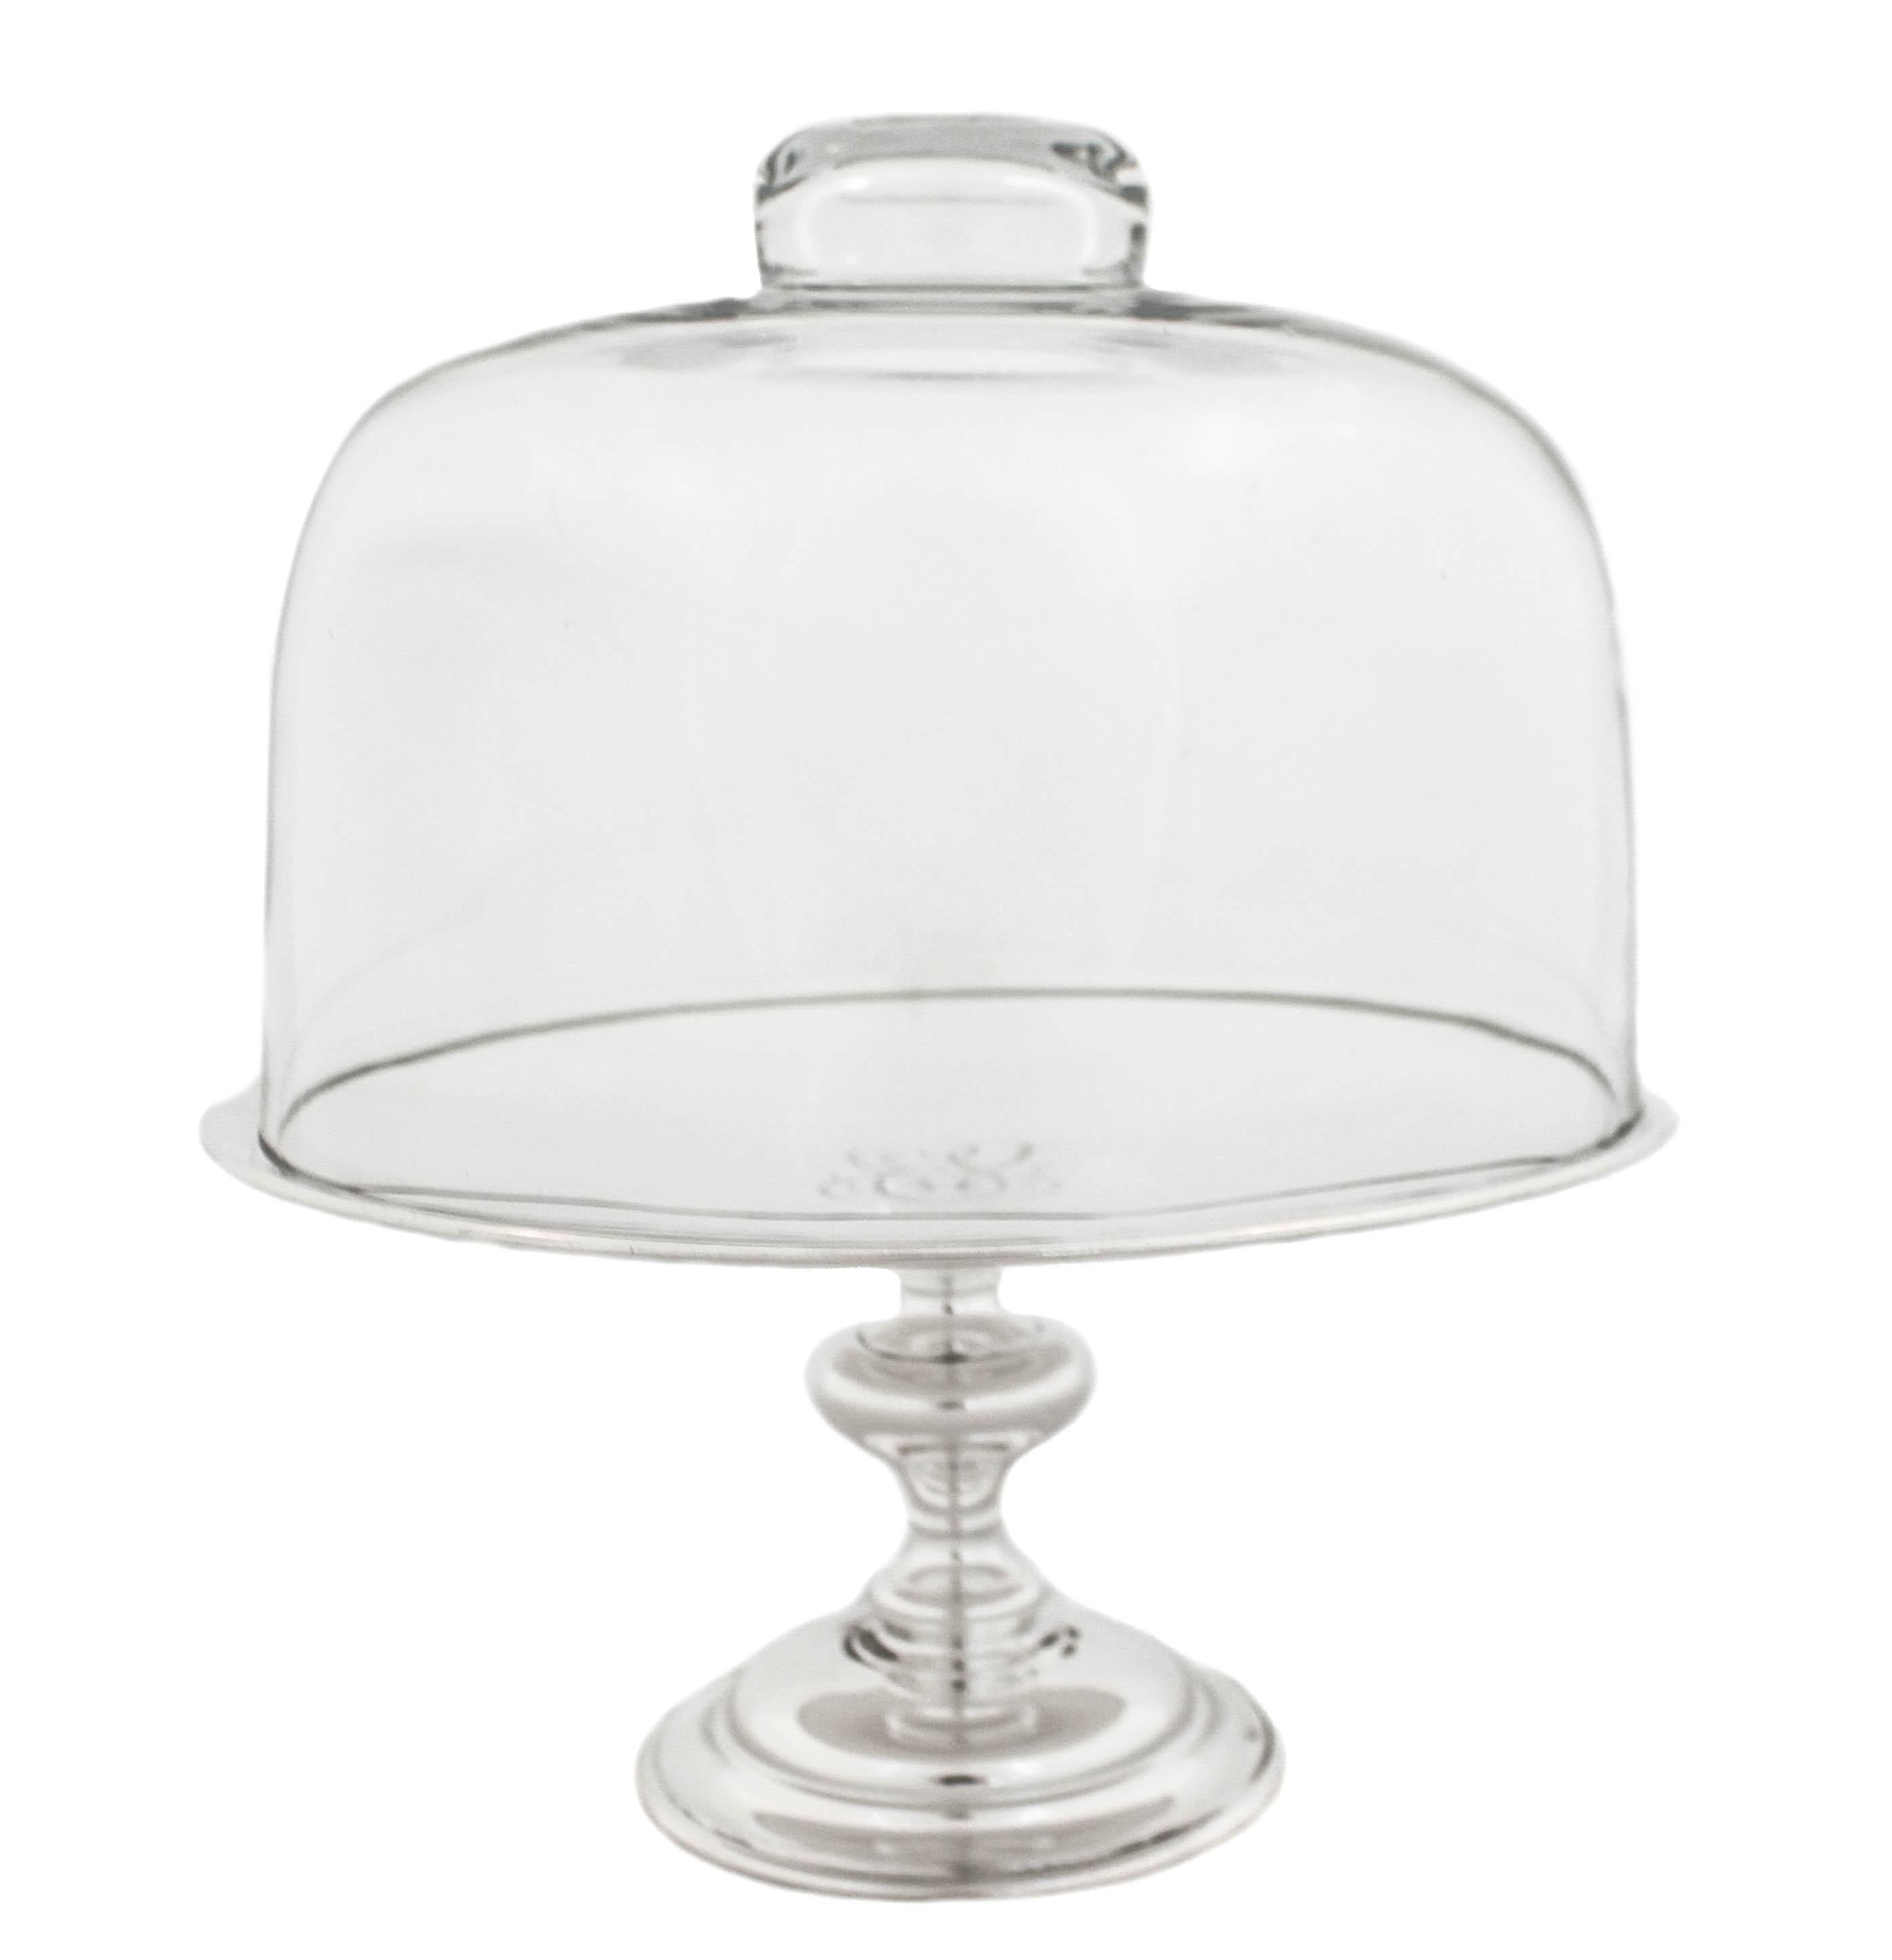 Very rare and exceptional sterling silver cake plate with the original glass dome. This midcentury sterling beauty is very rare; in our 25 years in business we have neither seen nor owned one— ever!! It has the simplicity and elegance of the